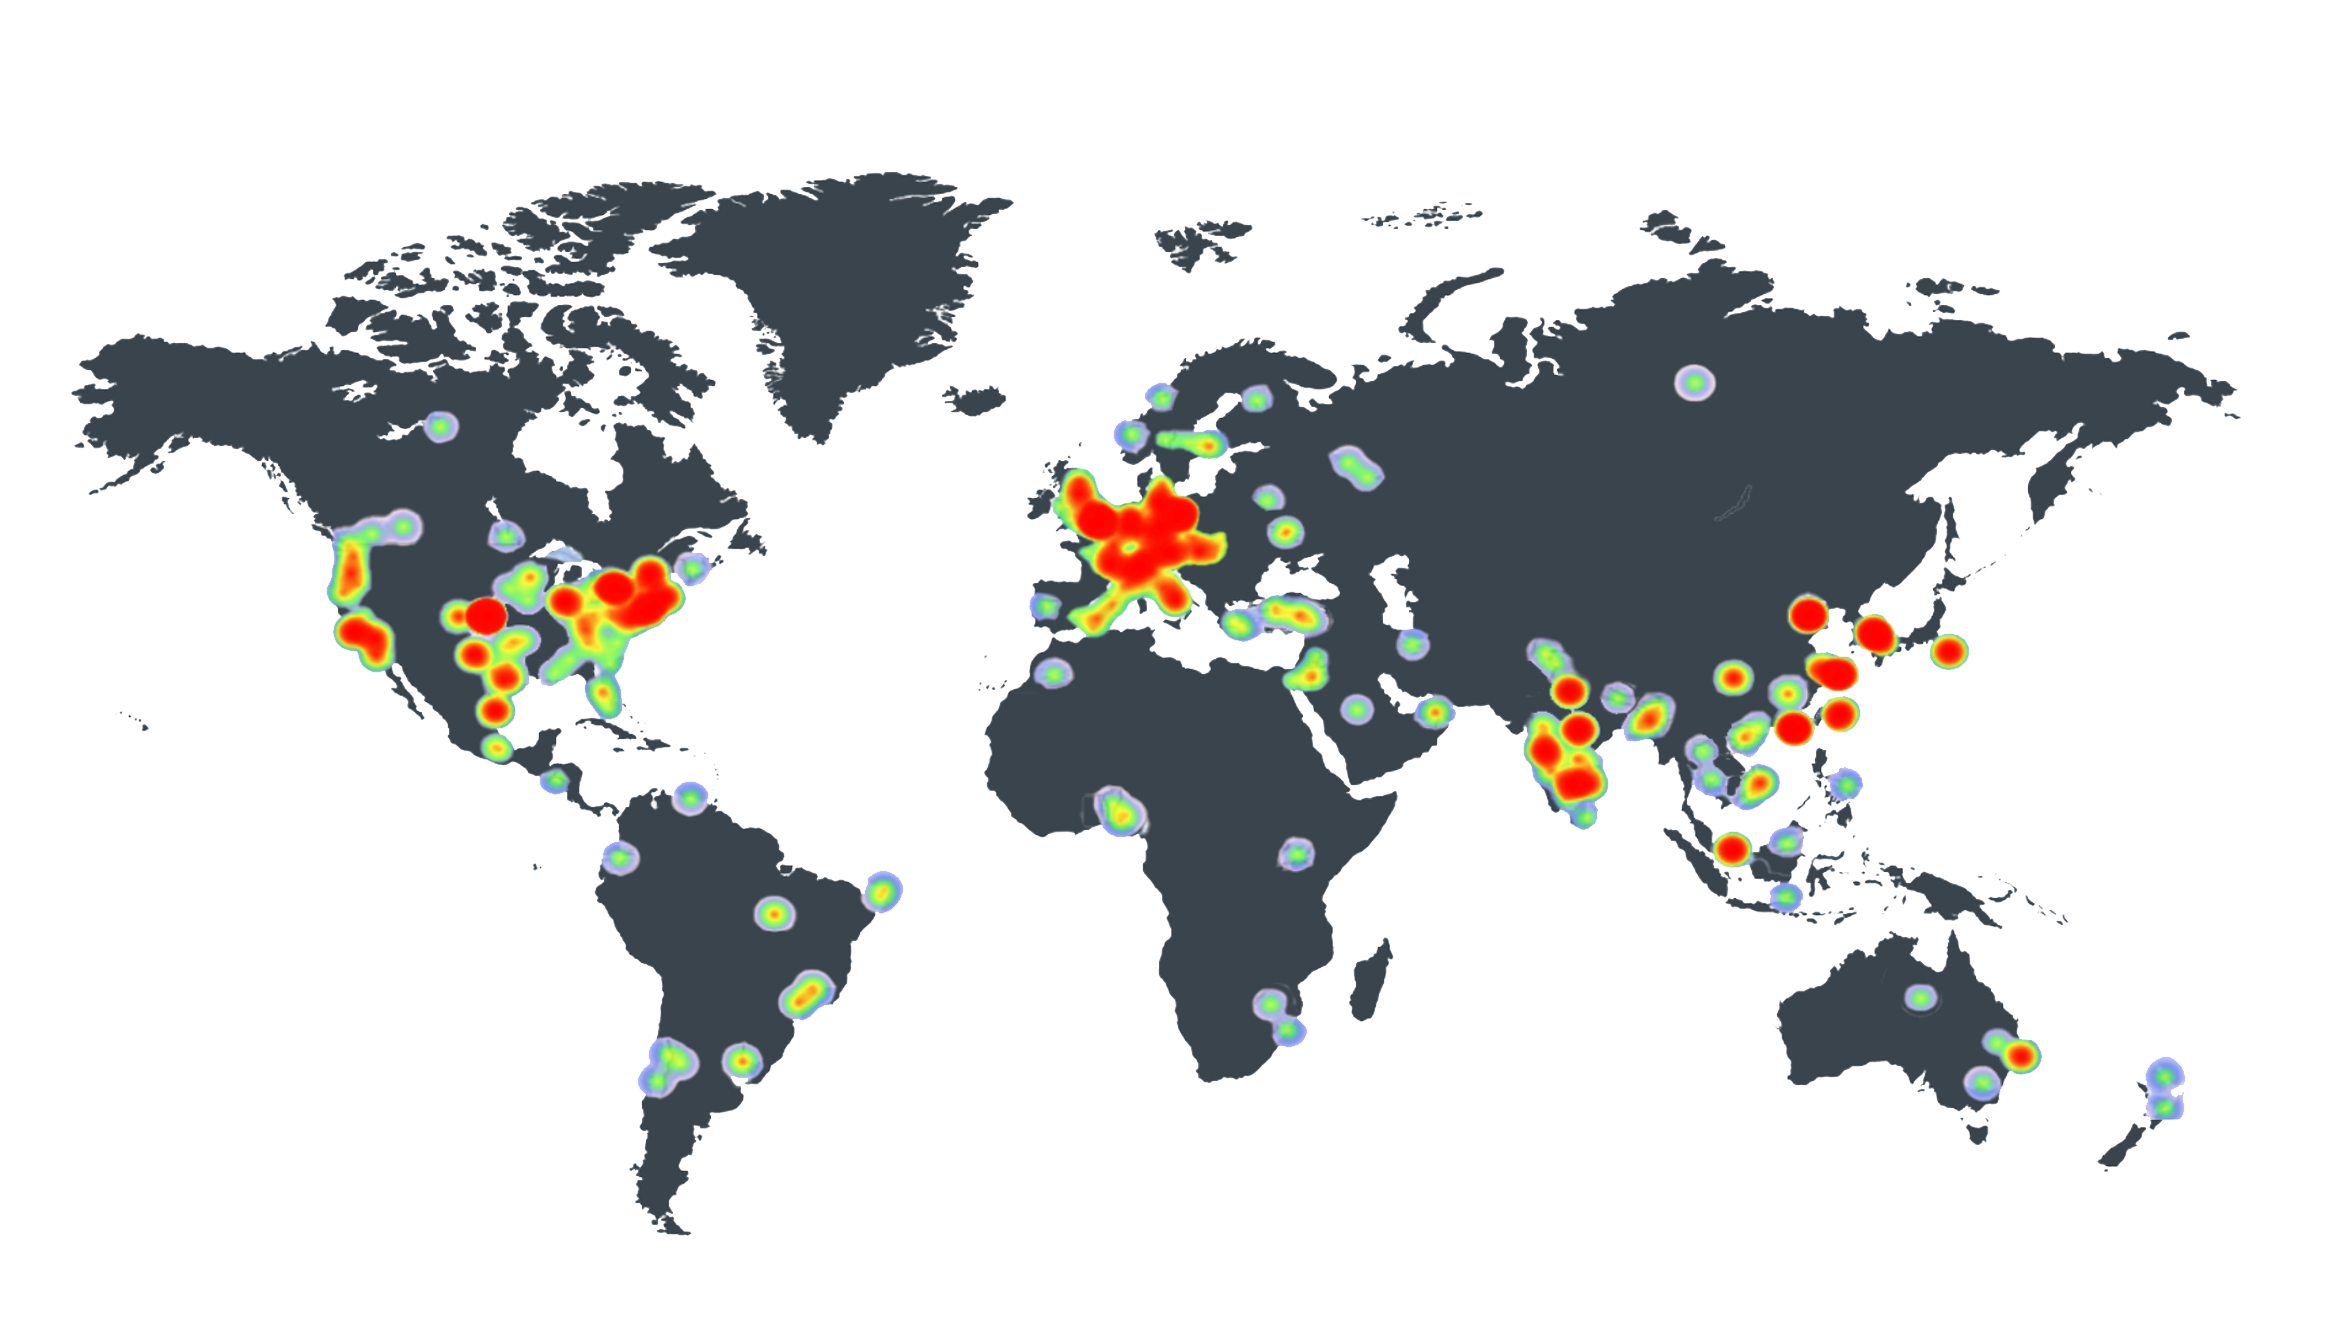 Heatmap showing how the Flower GitHub stargazers are distributed all over the globe